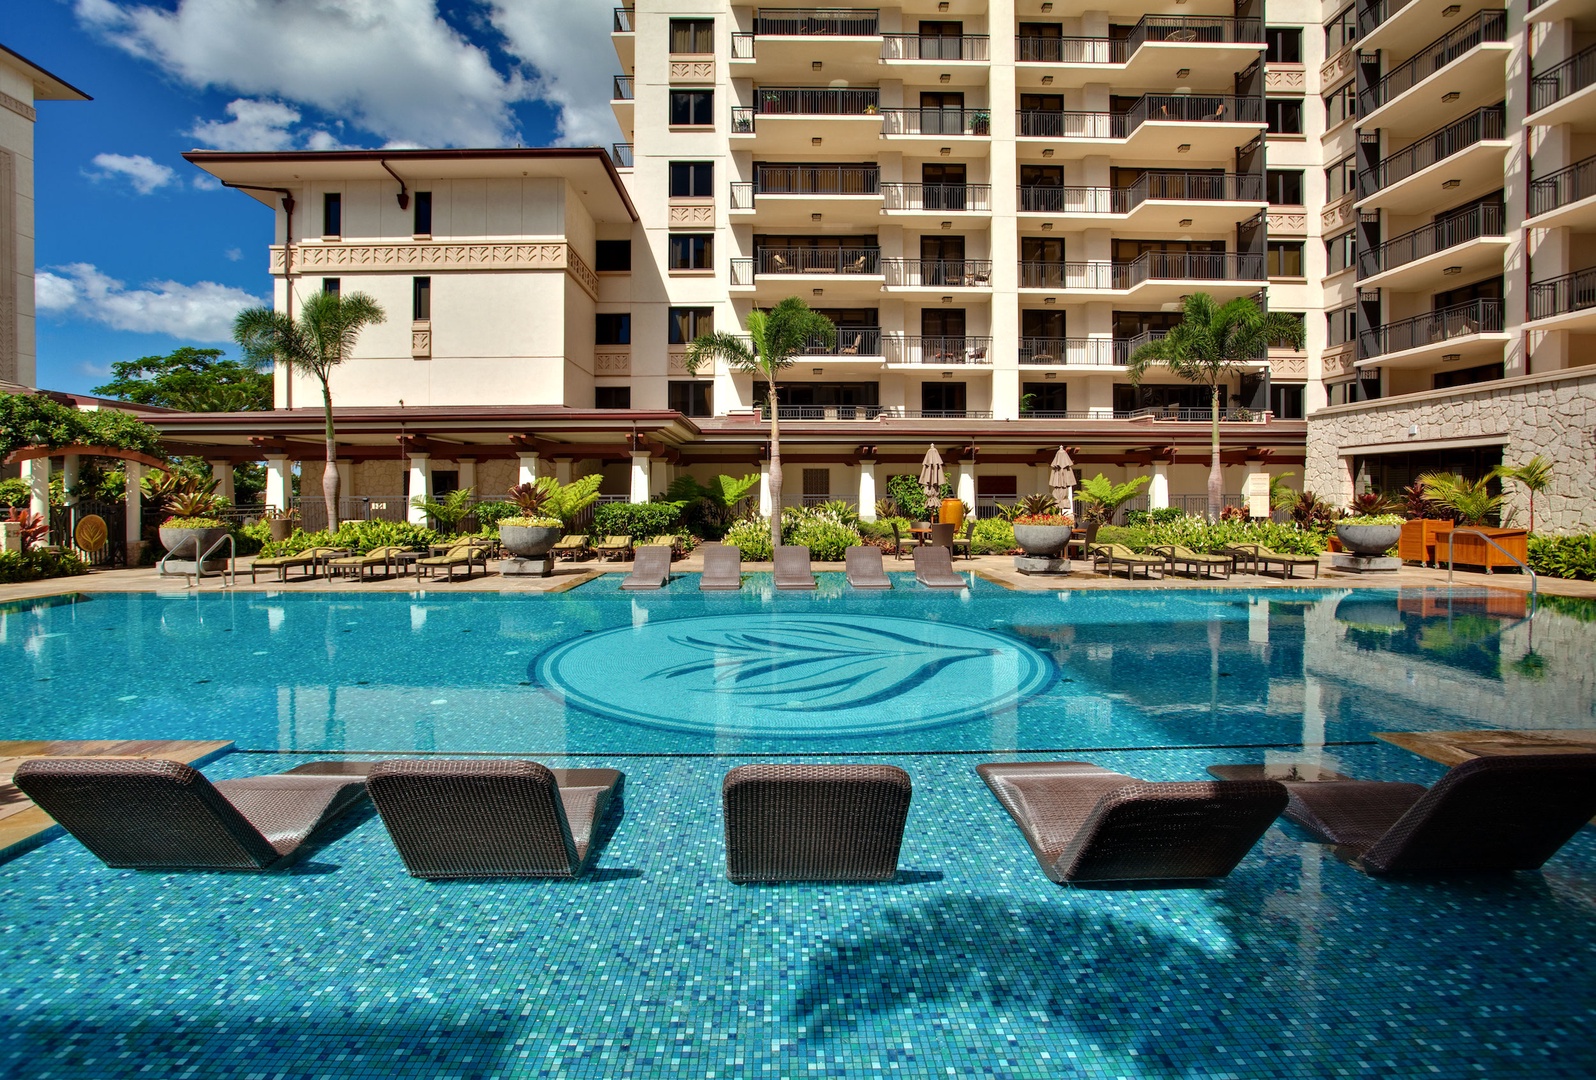 Kapolei Vacation Rentals, Ko Olina Beach Villa B604 - Refresh and unwind: our pool flanked by chaise lounges beckons after your day's adventures.